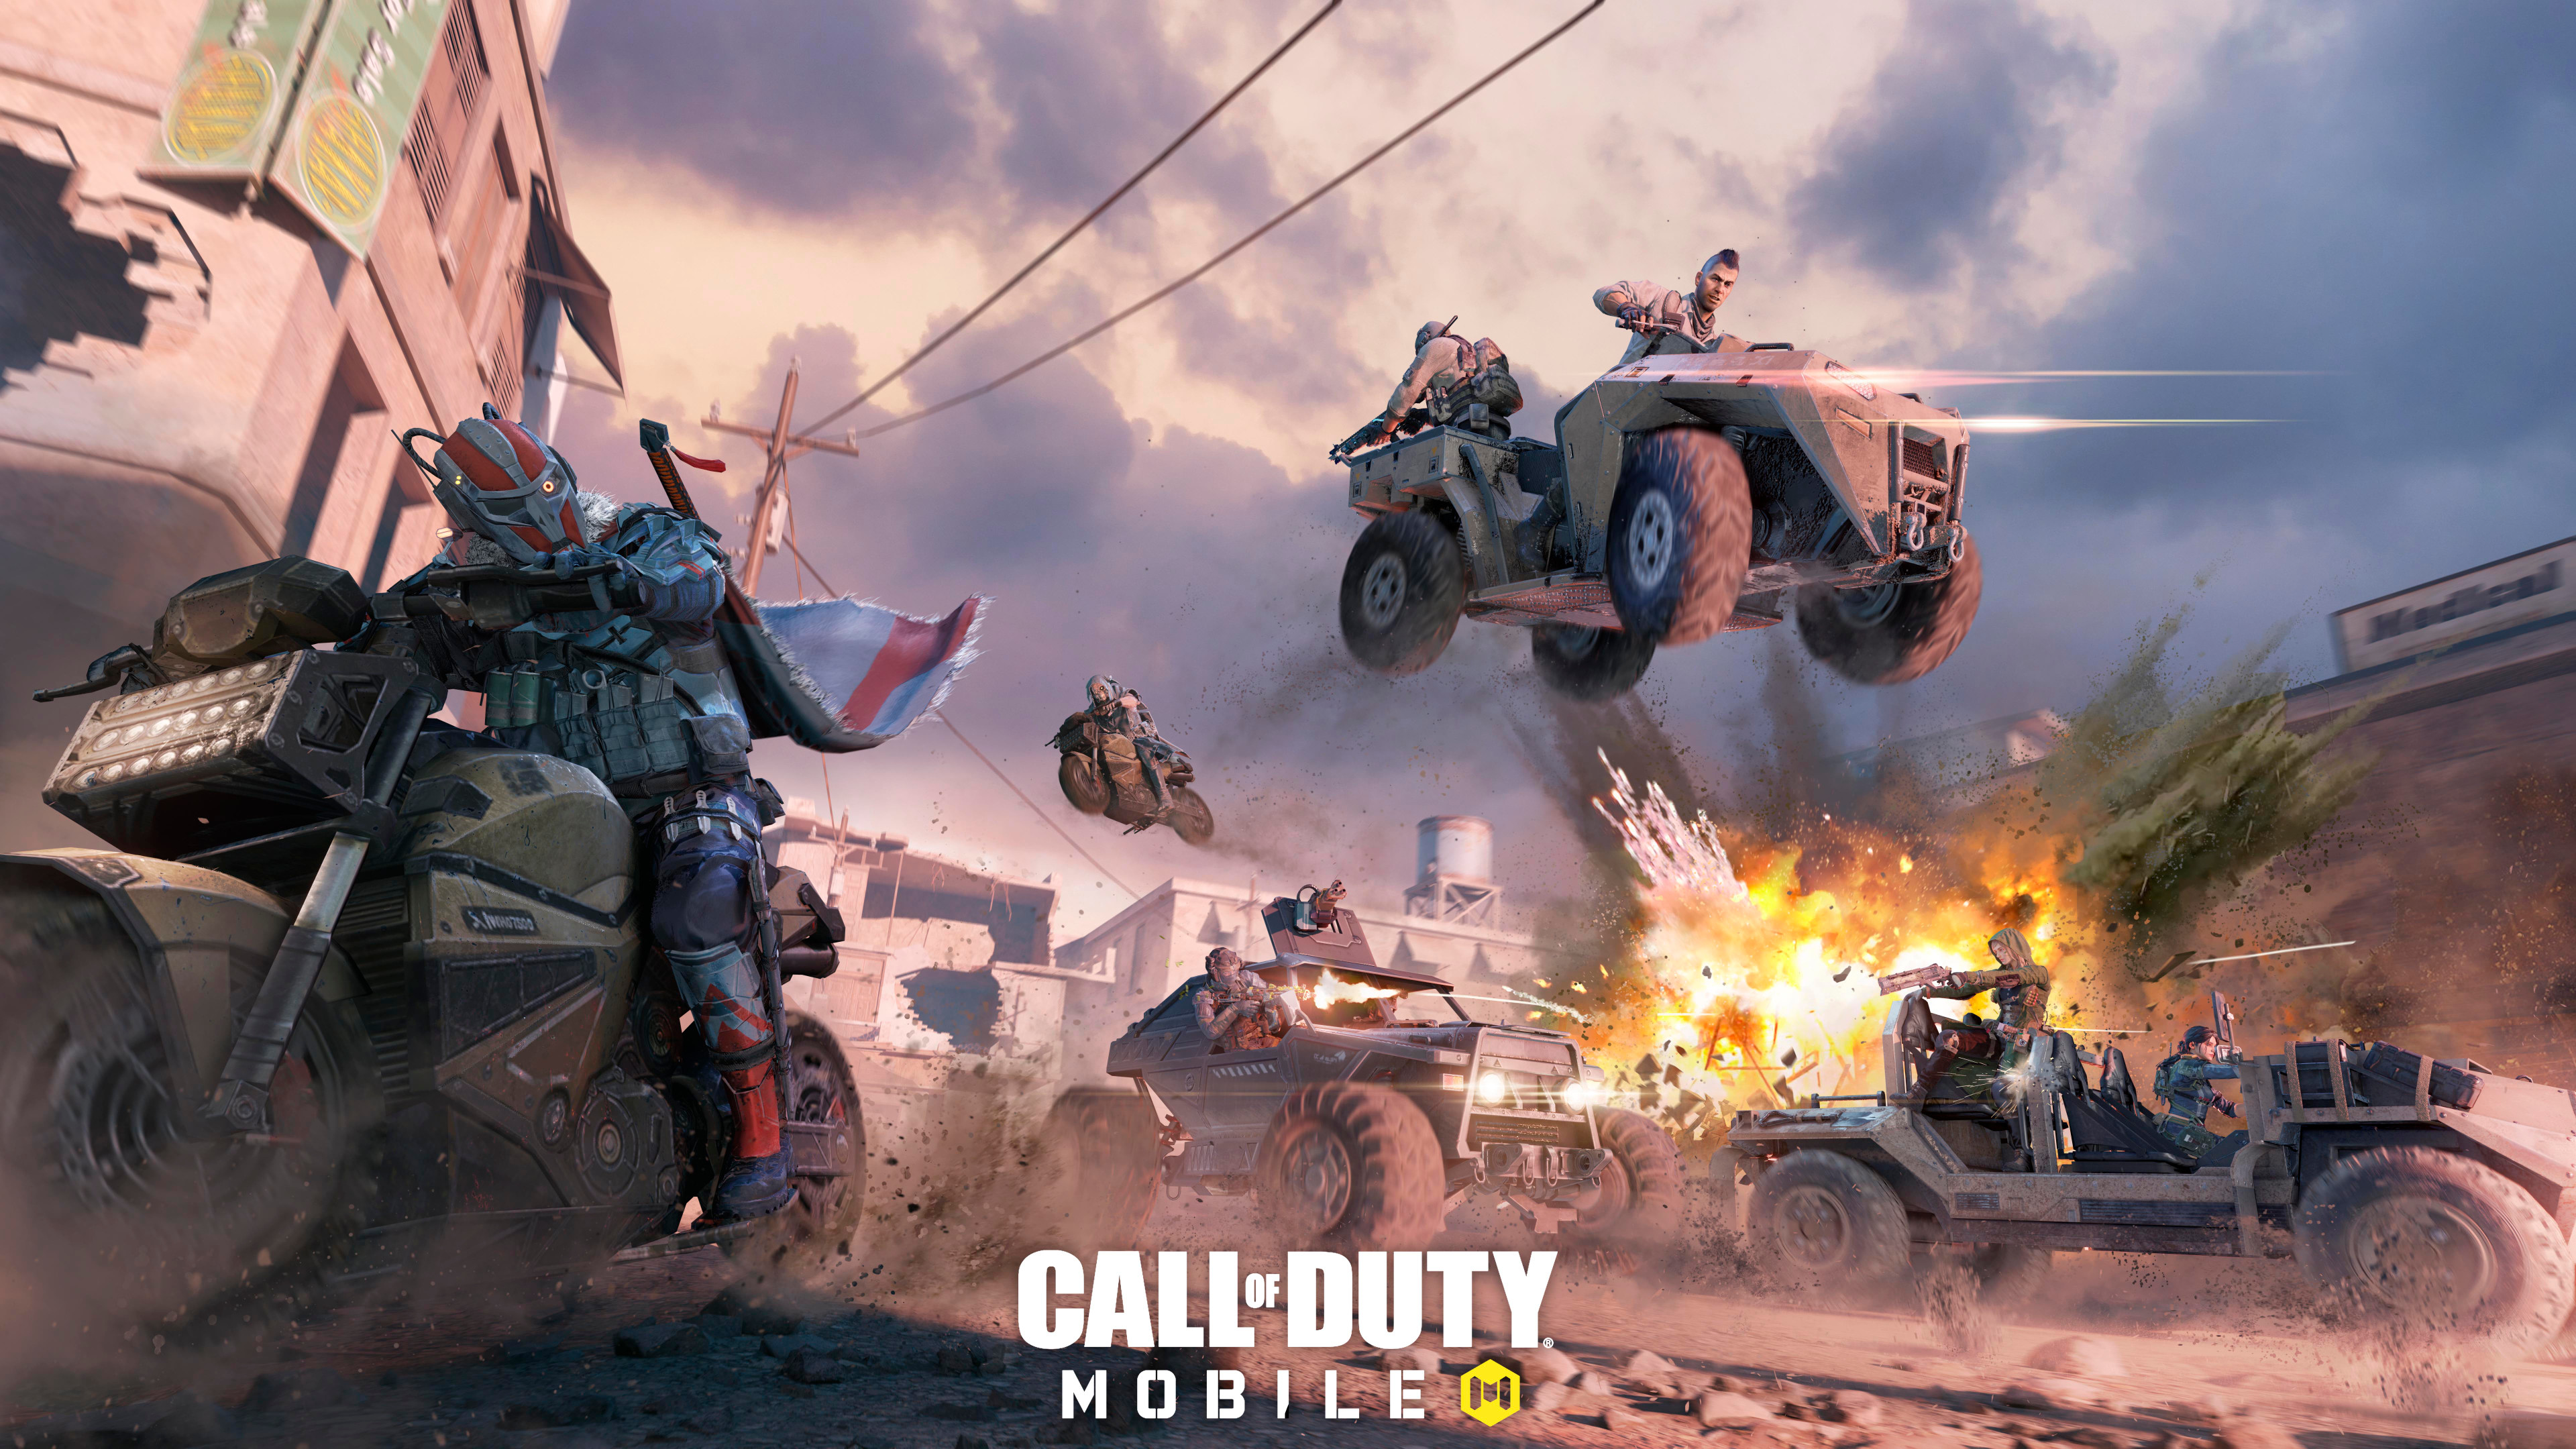 call of duty: mobile, video game, atv, motorcycle, vehicle HD wallpaper